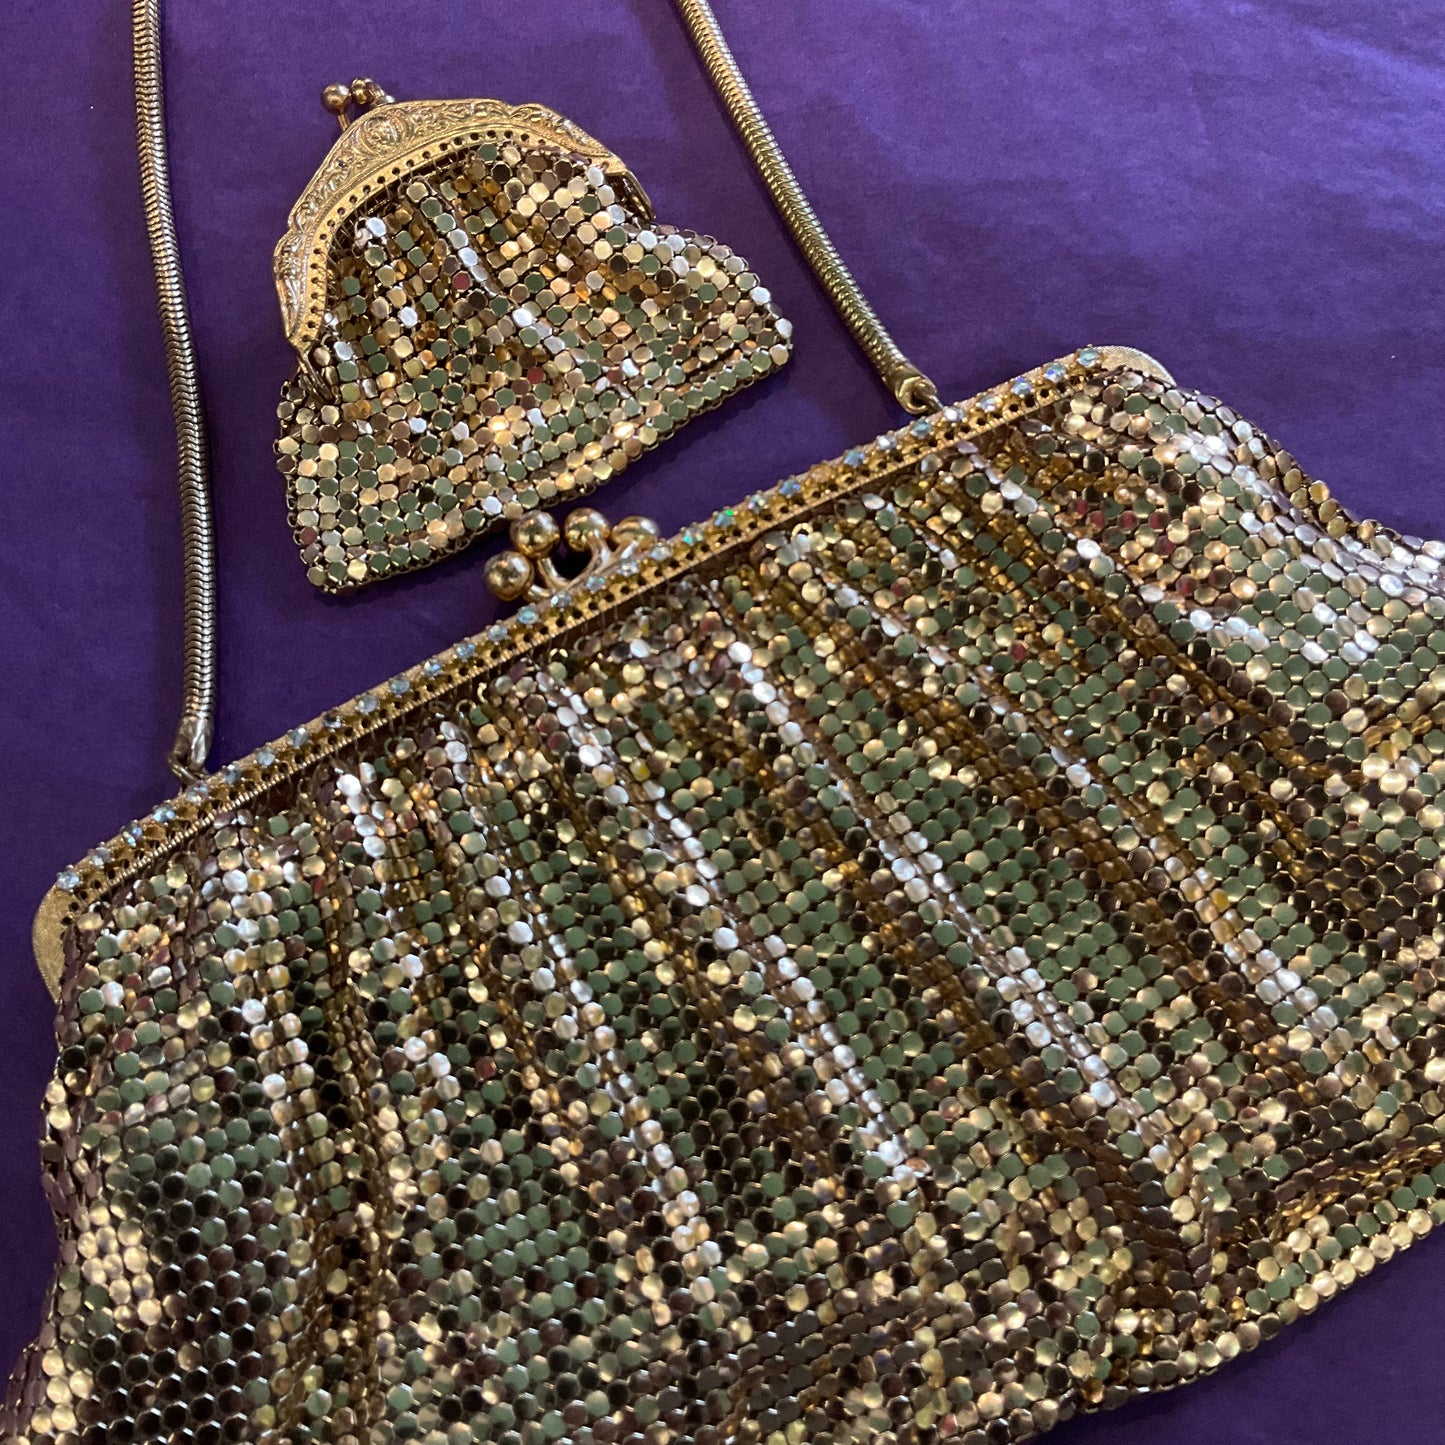 Vintage 1940/50s Gold (chain mail) evening bag with matching coin purse, rhinestone clasp, wedding, prom, gift for her